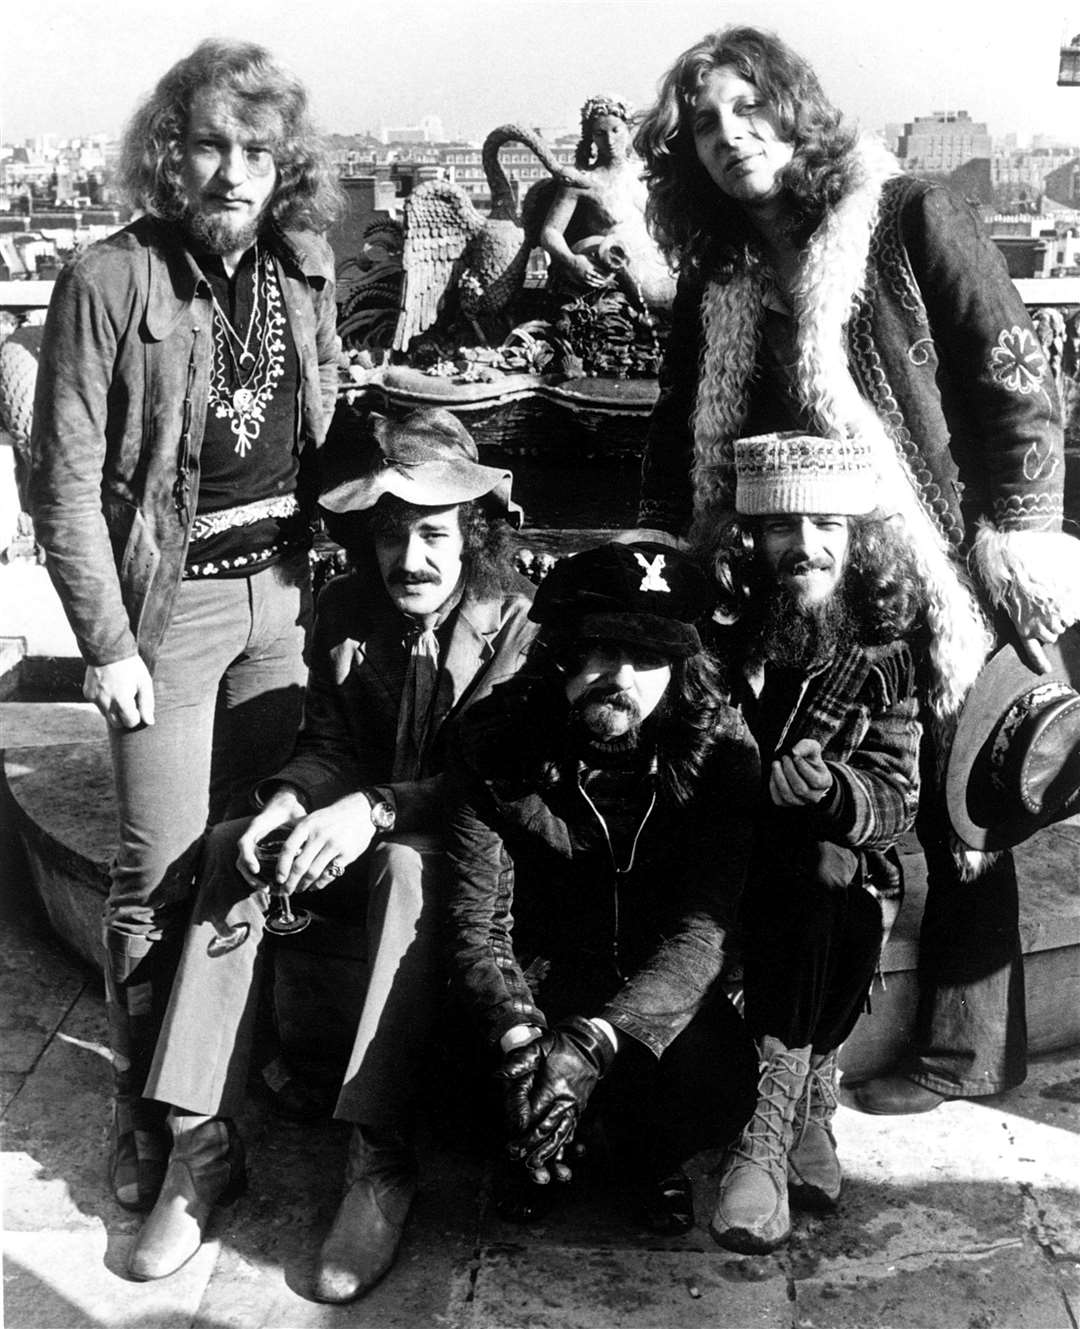 Jethro Tull first formed in the 1960s. Picture: Simon Blackmore